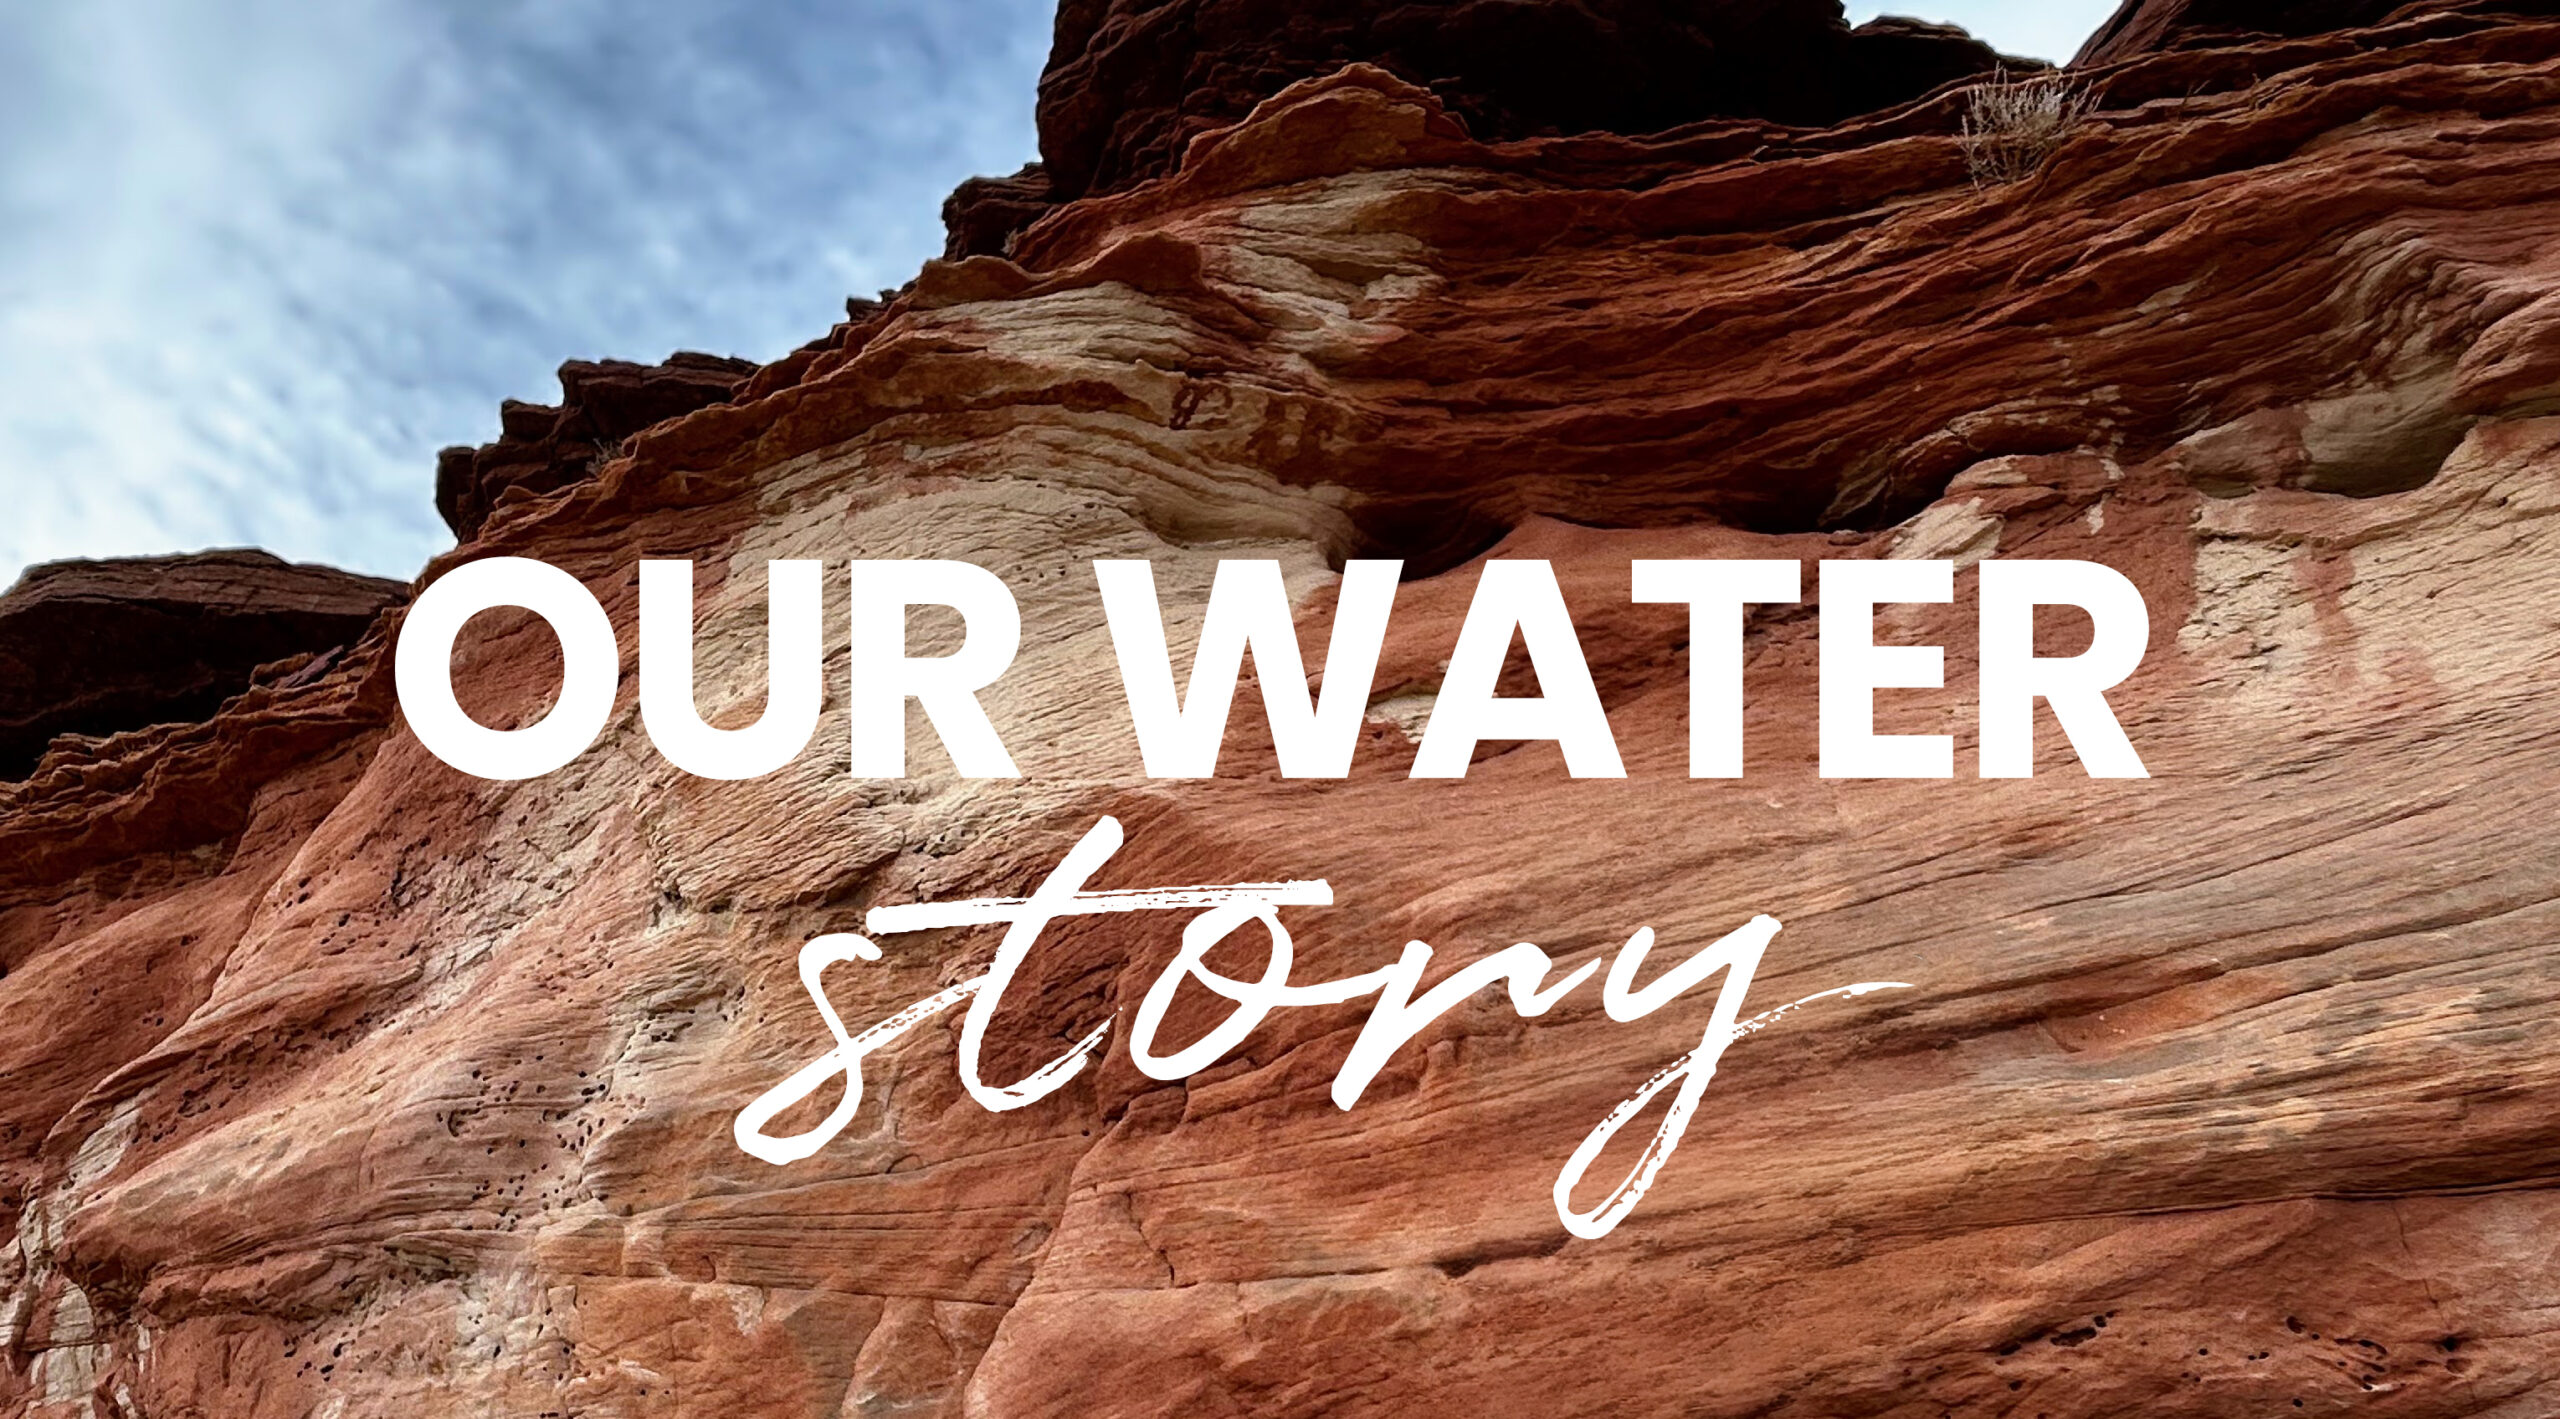 Our water story